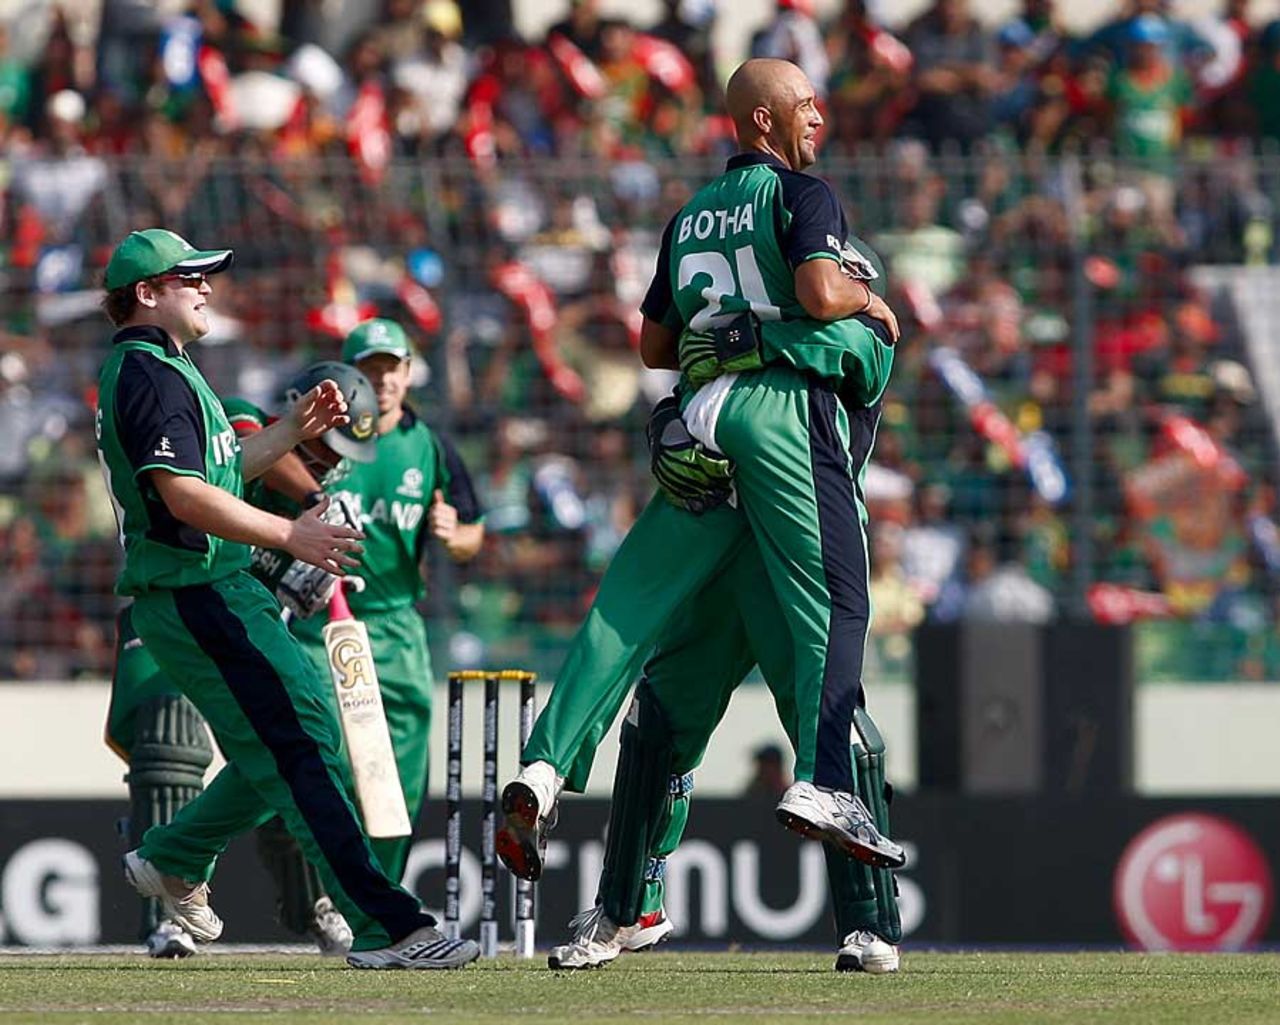 Andre Botha celebrates after claiming the huge wicket of Tamim Iqbal, Bangladesh v Ireland, World Cup 2011, Mirpur, February 25, 2010
